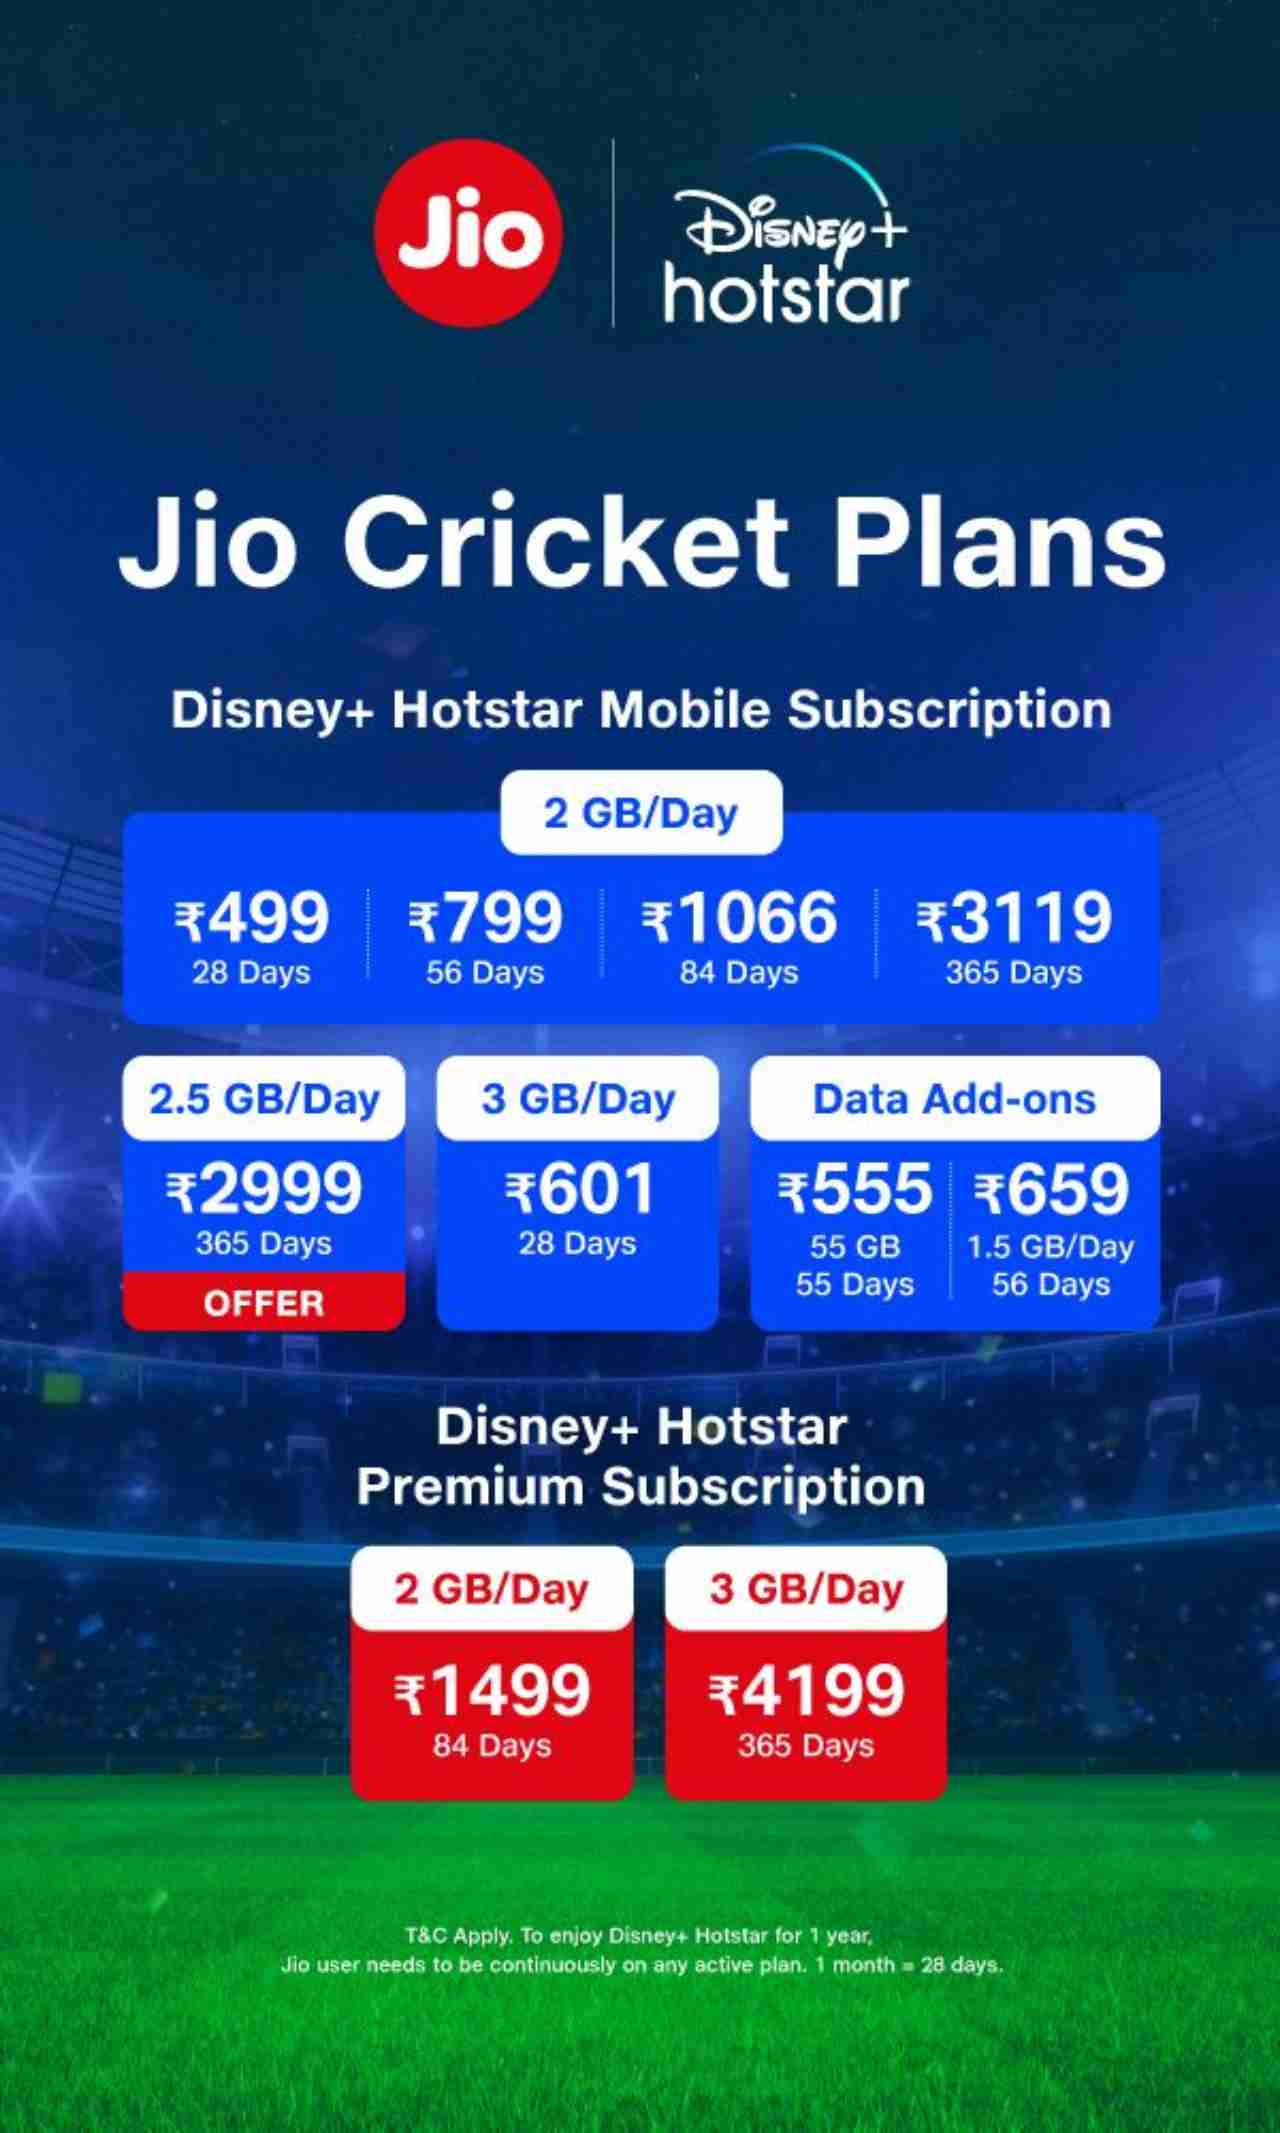 Reliance Jio T20 Dhan Dhana Dhan Brings Exciting Plans And Rewards For Cricket Lovers With Free Disney+ Hotstar Subscription For Ipl 2022f